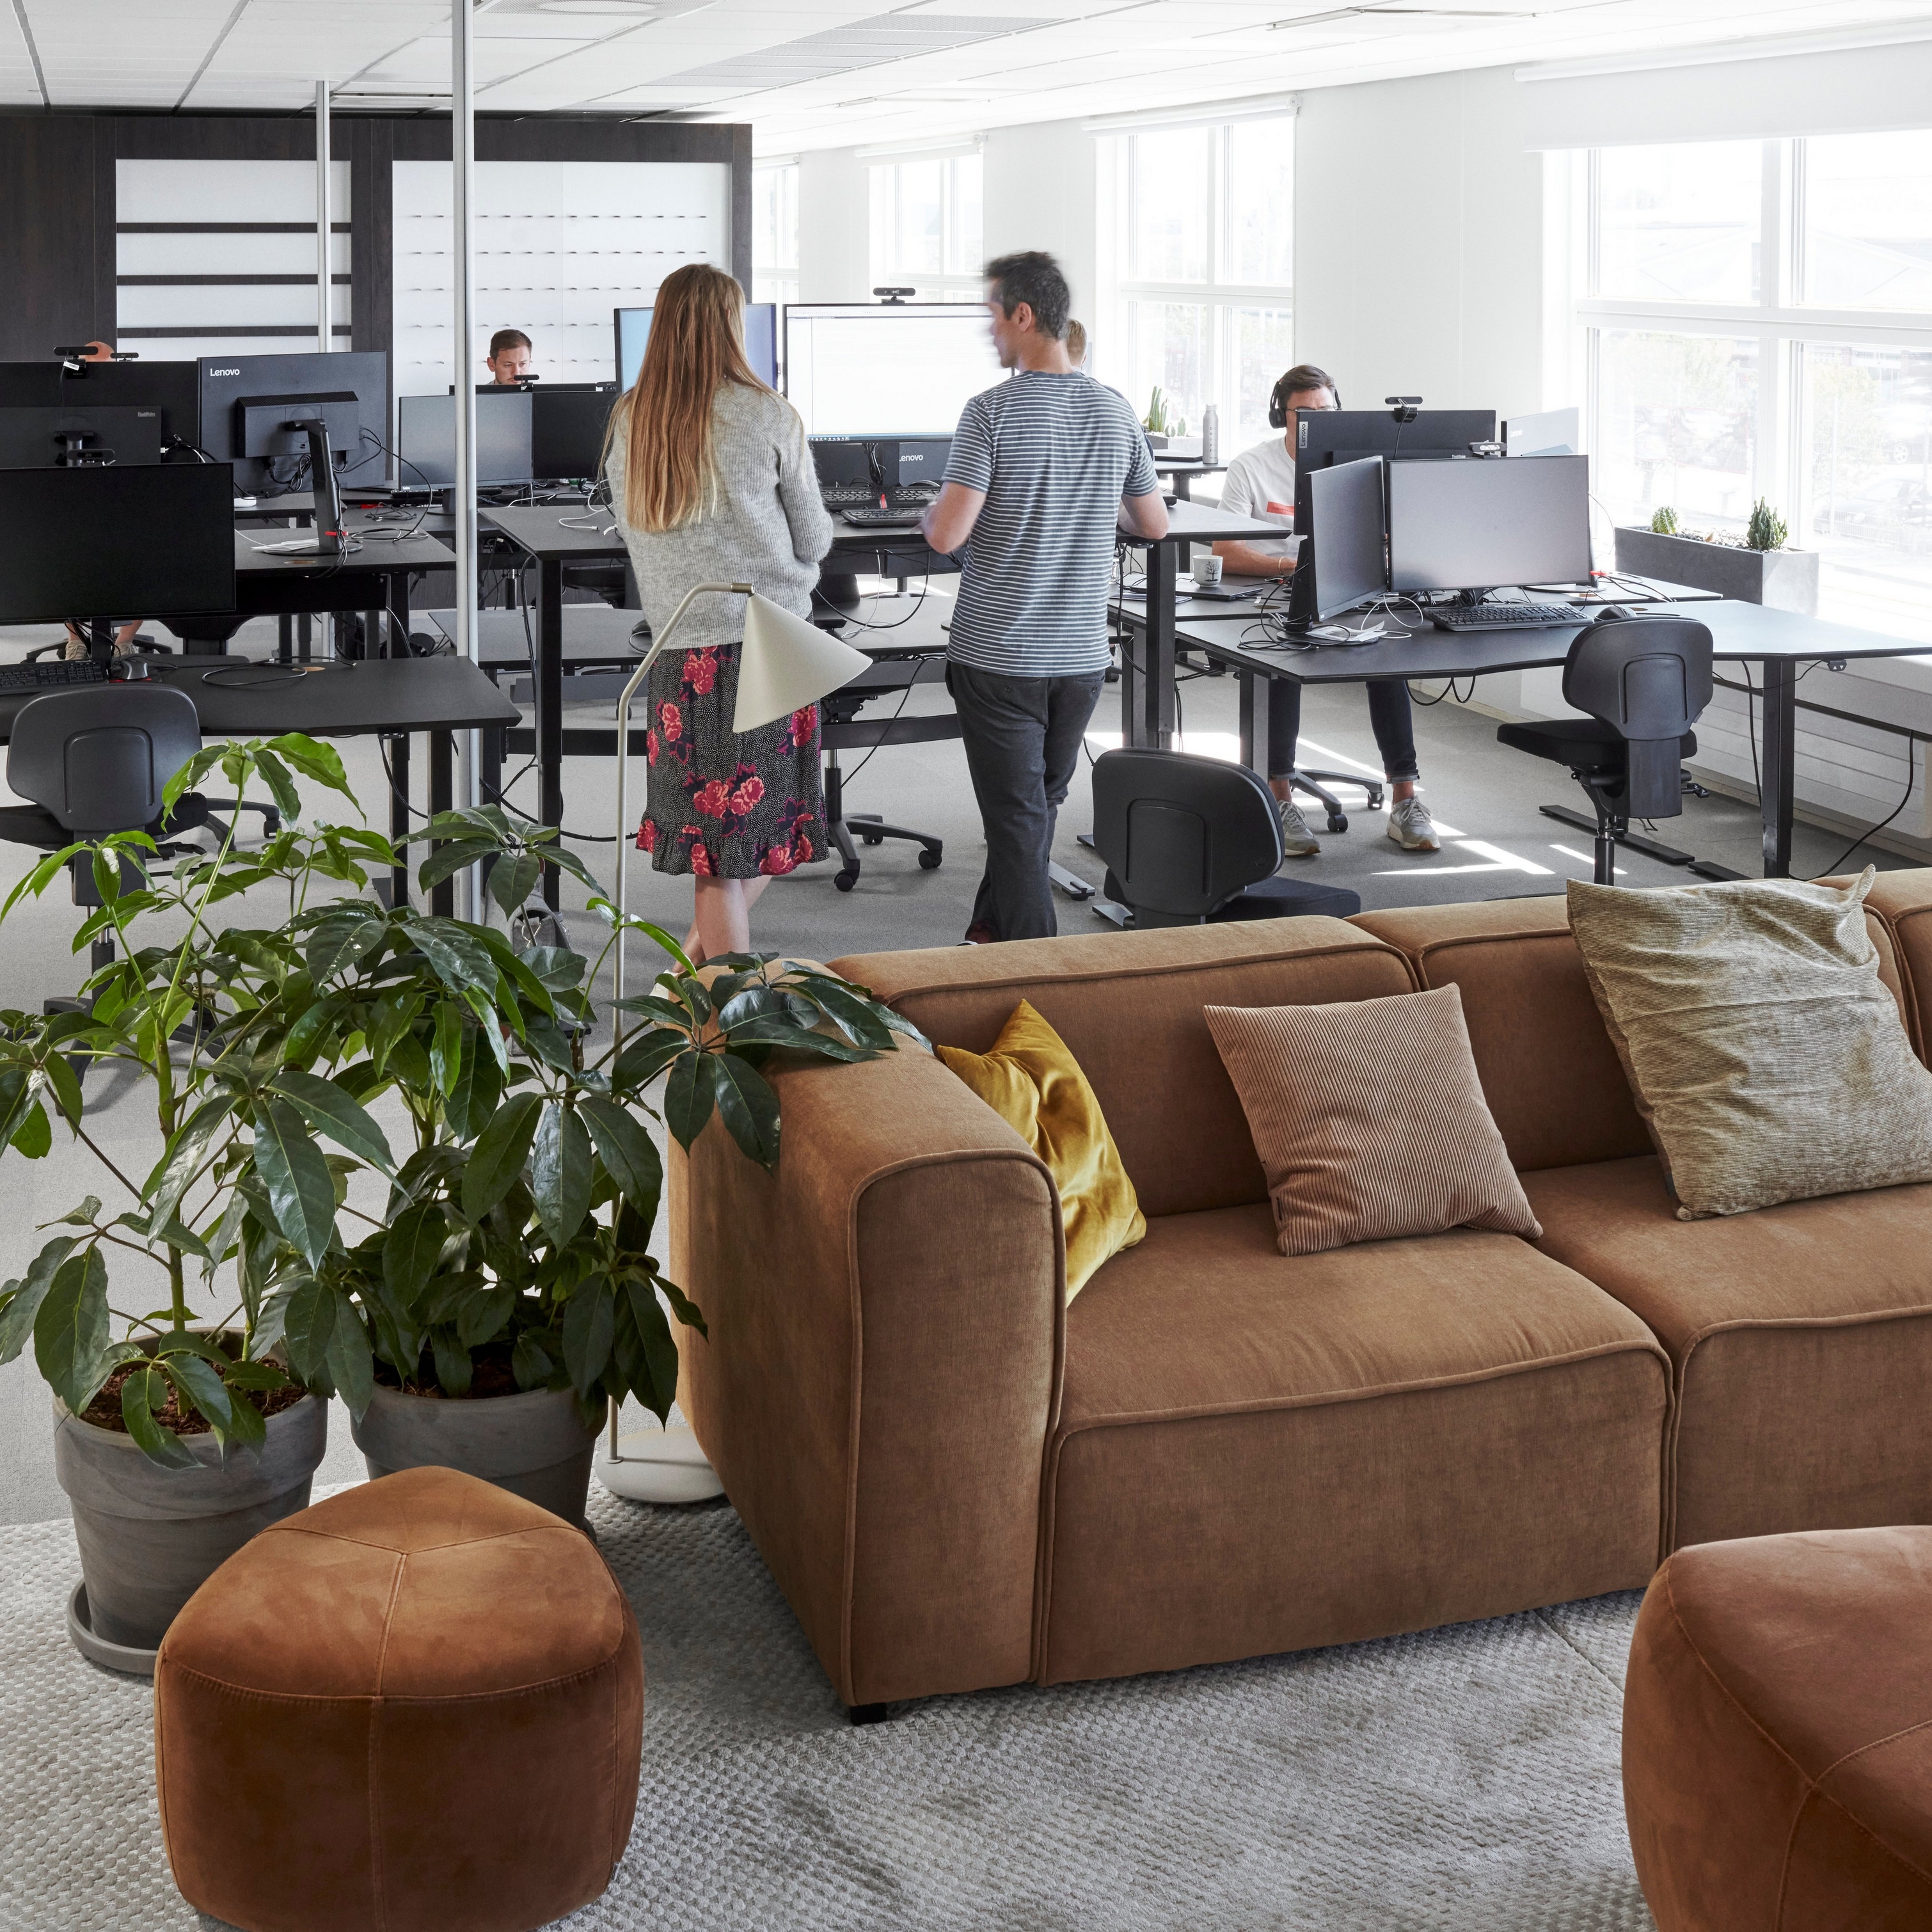 BoConcept's modern HQ office space with employees, computers, plants,and a brown Carmo sofa.